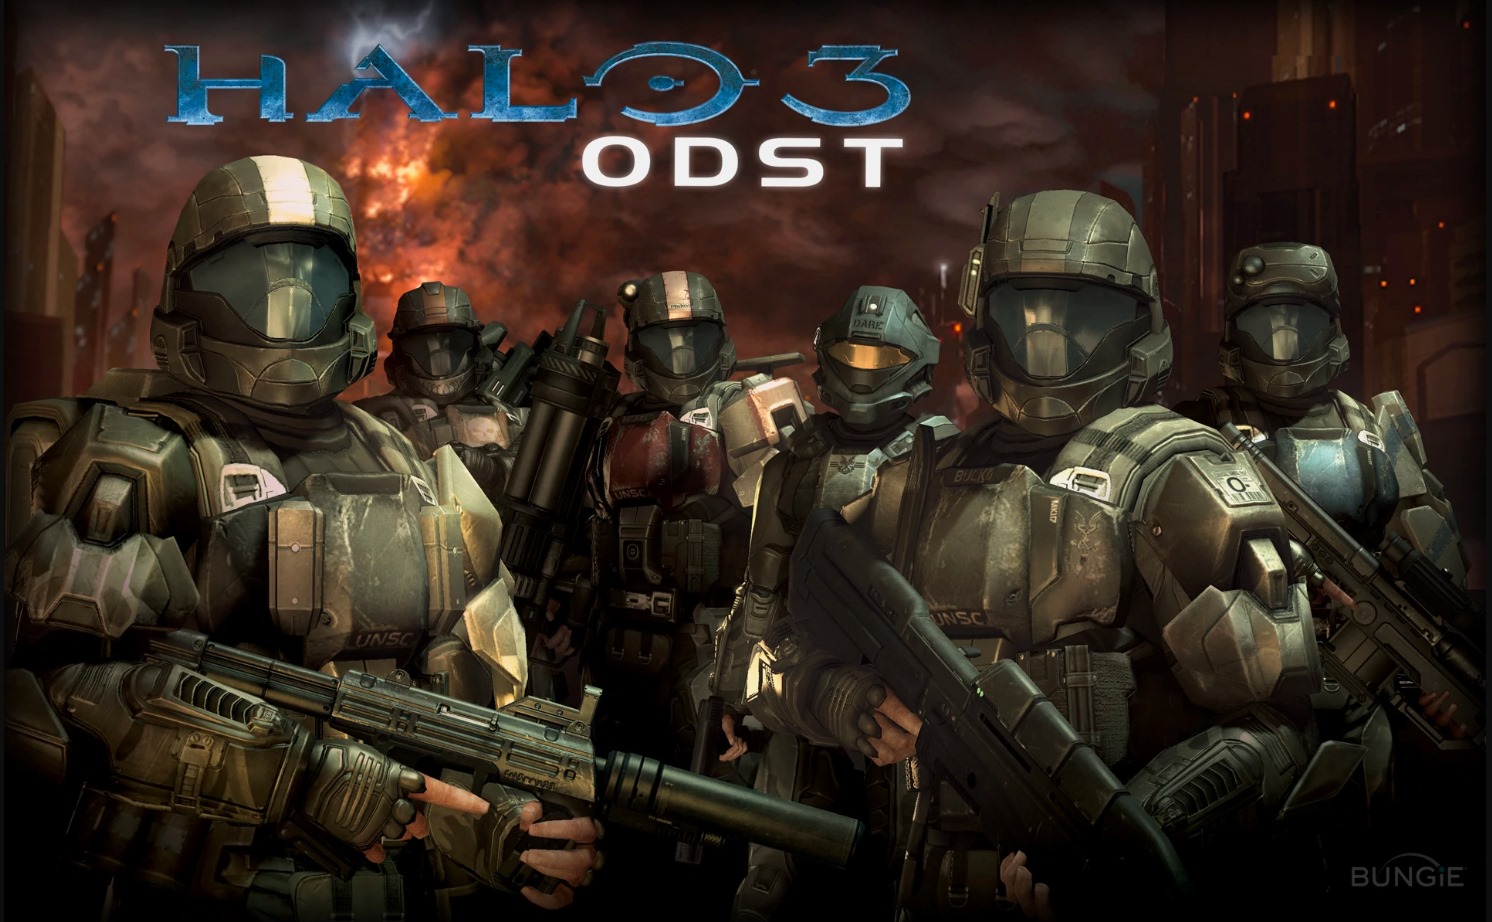 It's About Time For Another ODST Game